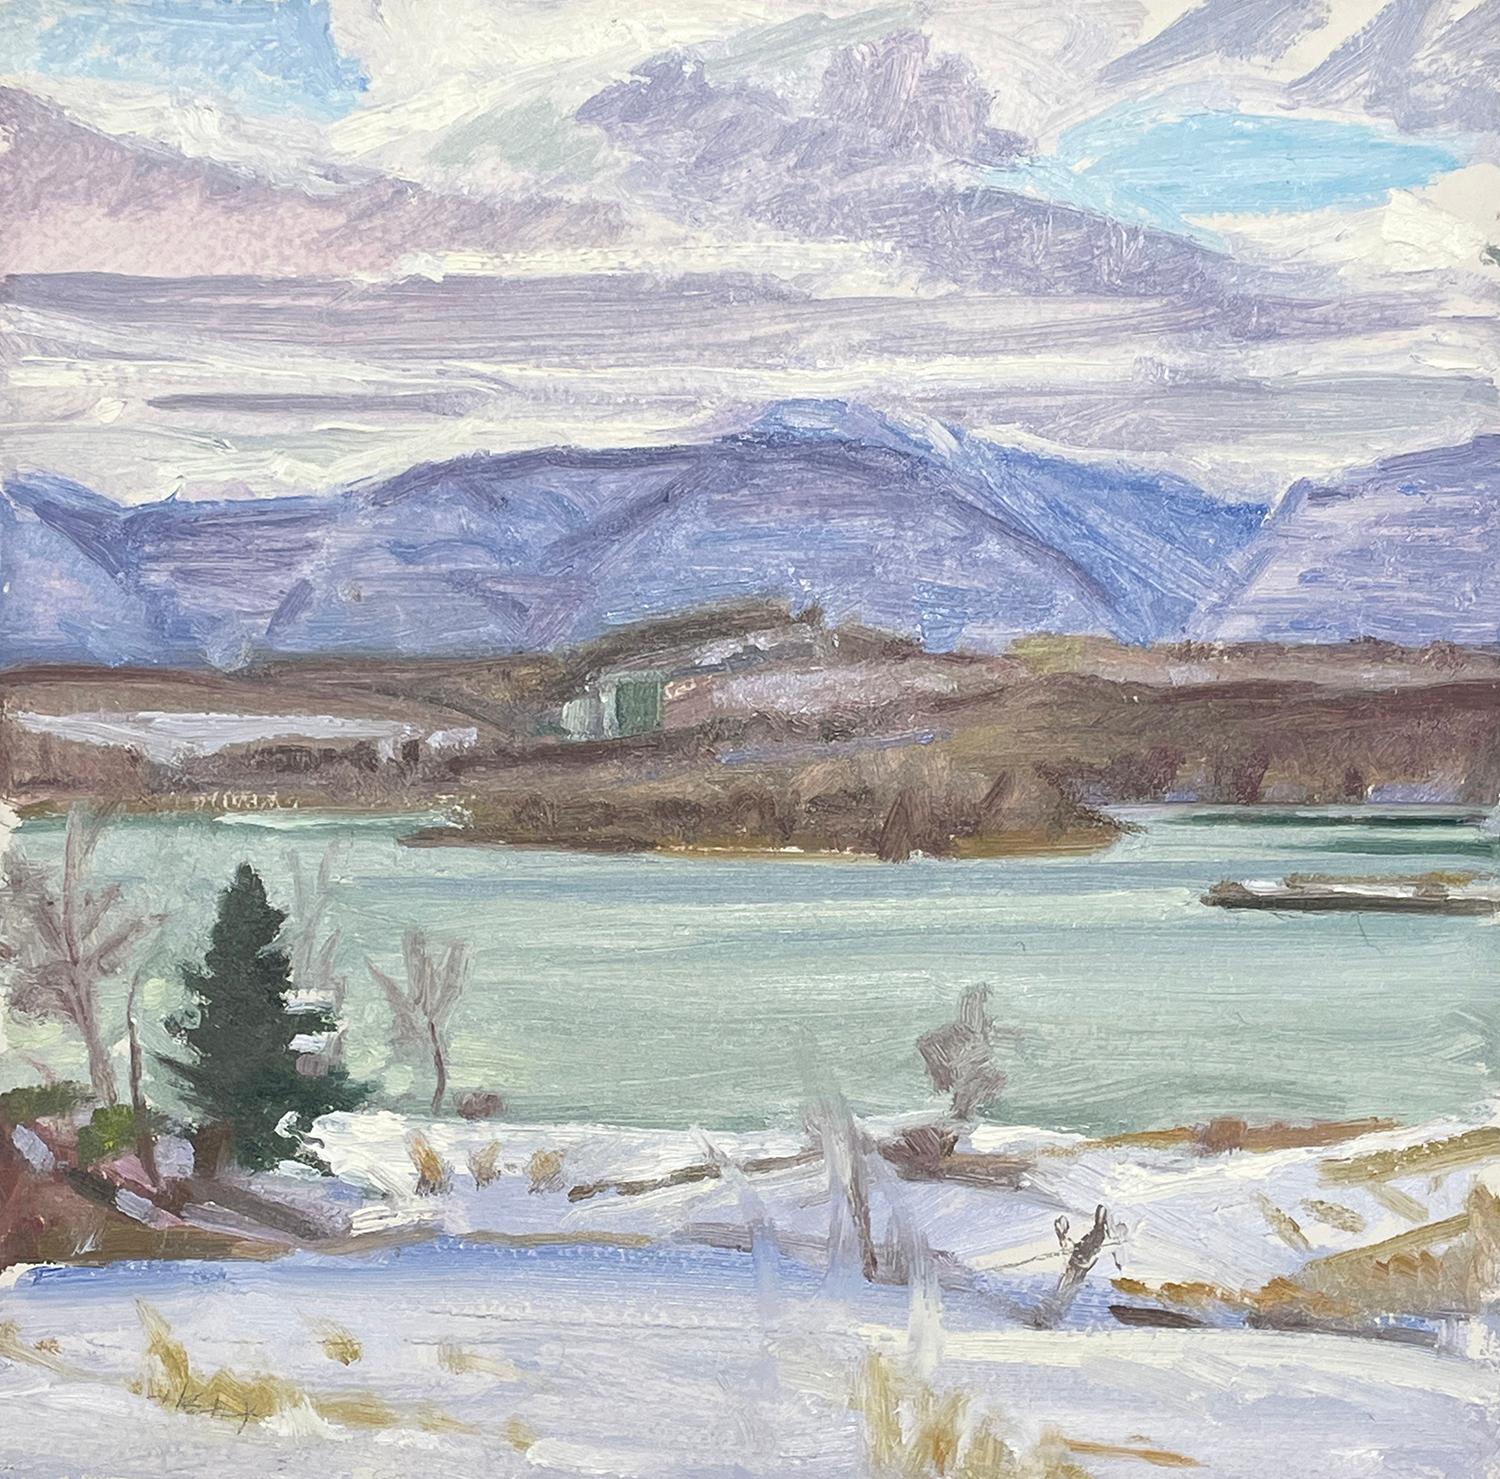 From Germantown II (Plein Air Winter Landscape of Hudson River & Mountains)